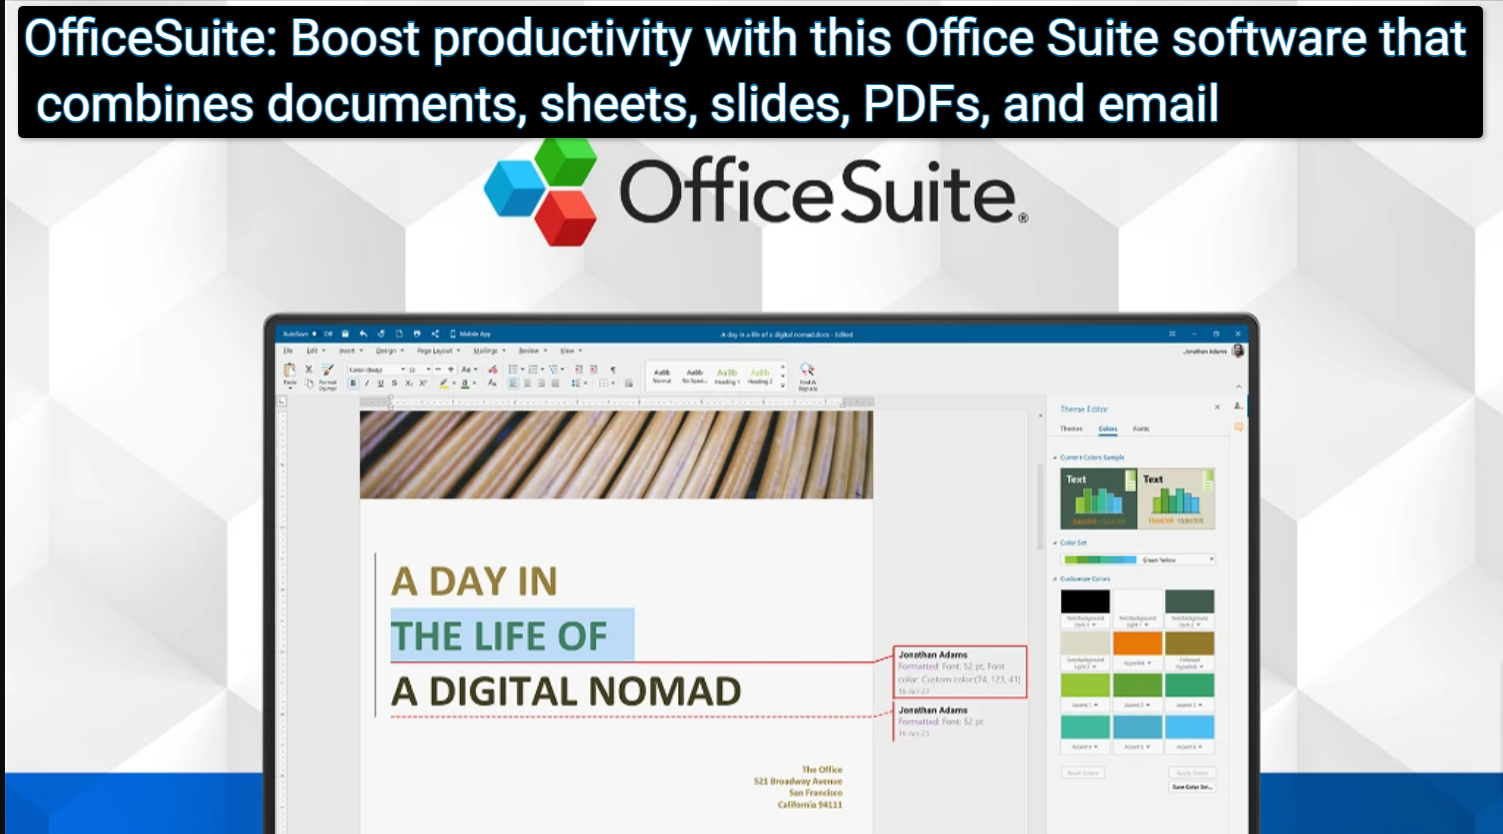 OfficeSuite Boost productivity with this Office Suite software that combines documents sheets slides PDFs and email Enhance your productivity with OfficeSuite Free Version. Mix documents, spreadsheets, slides, PDFs, and email together in OfficeSuite for better productivity.